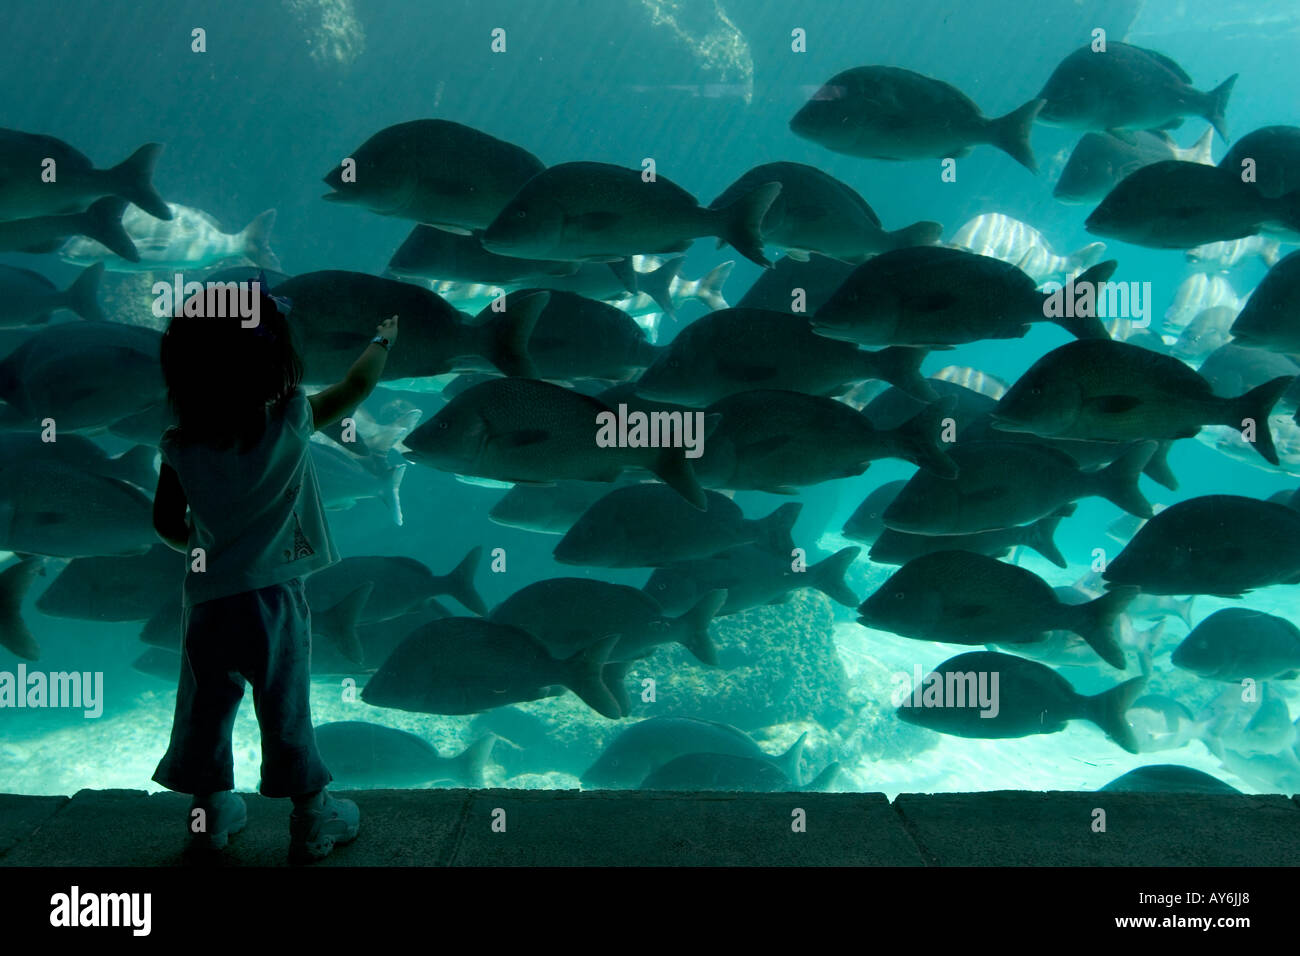 A CHILD REACHES OUT IN AN ATTEMPT TO TOUCH A SCHOOL OF WHITE MARGATES THROUGH THE AQUARIUM GLASS AT ATLANTIS RESORT BAHAMAS Stock Photo